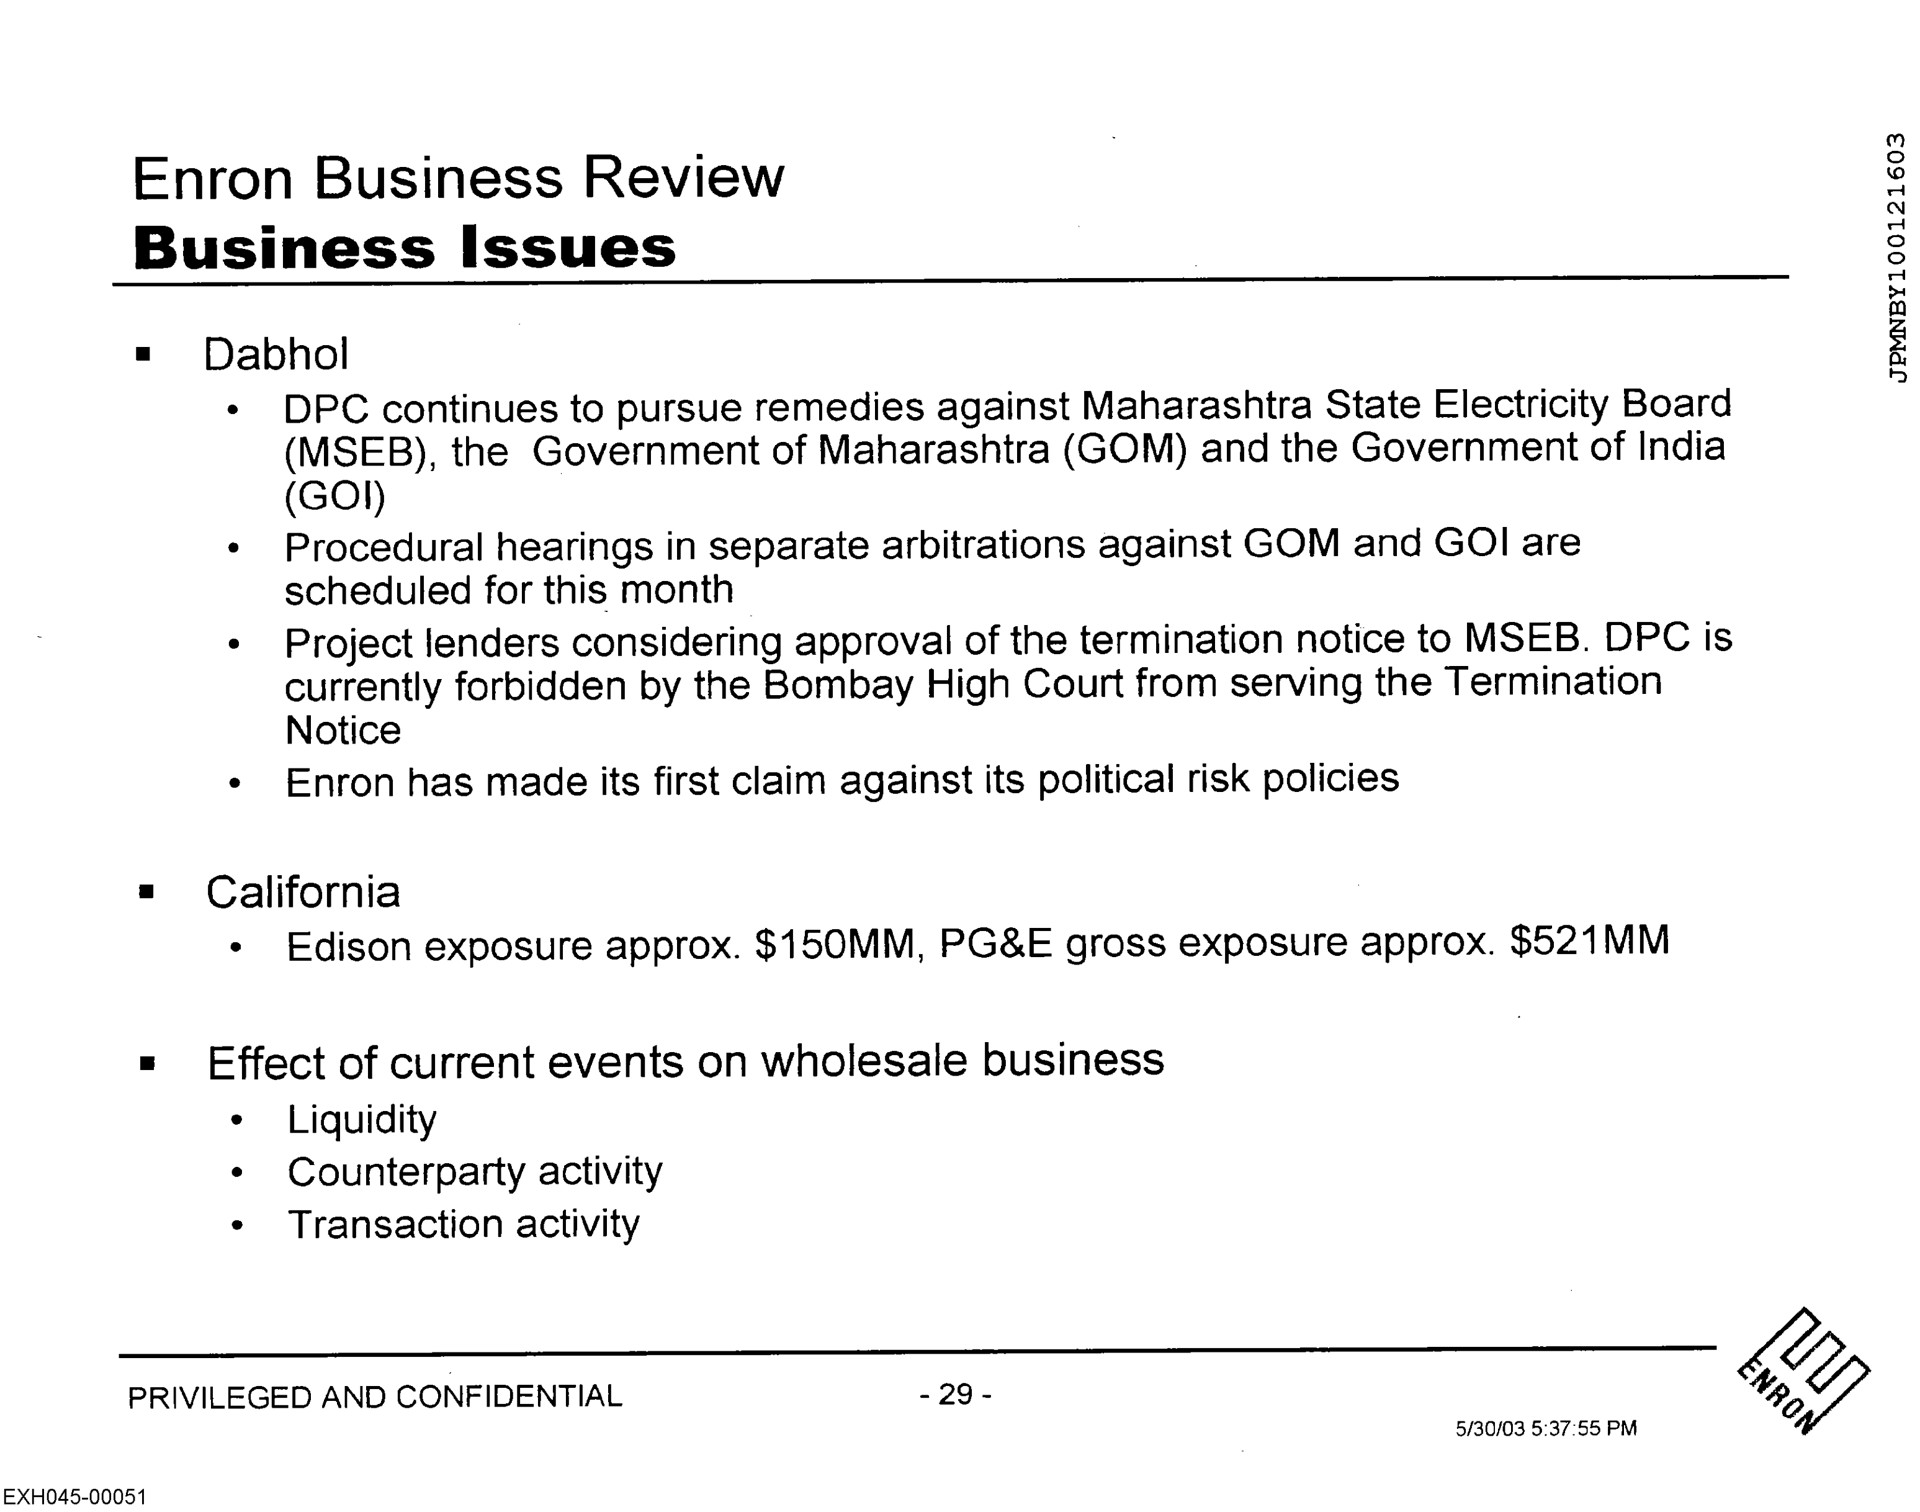 business review business issues liquidity | Enron